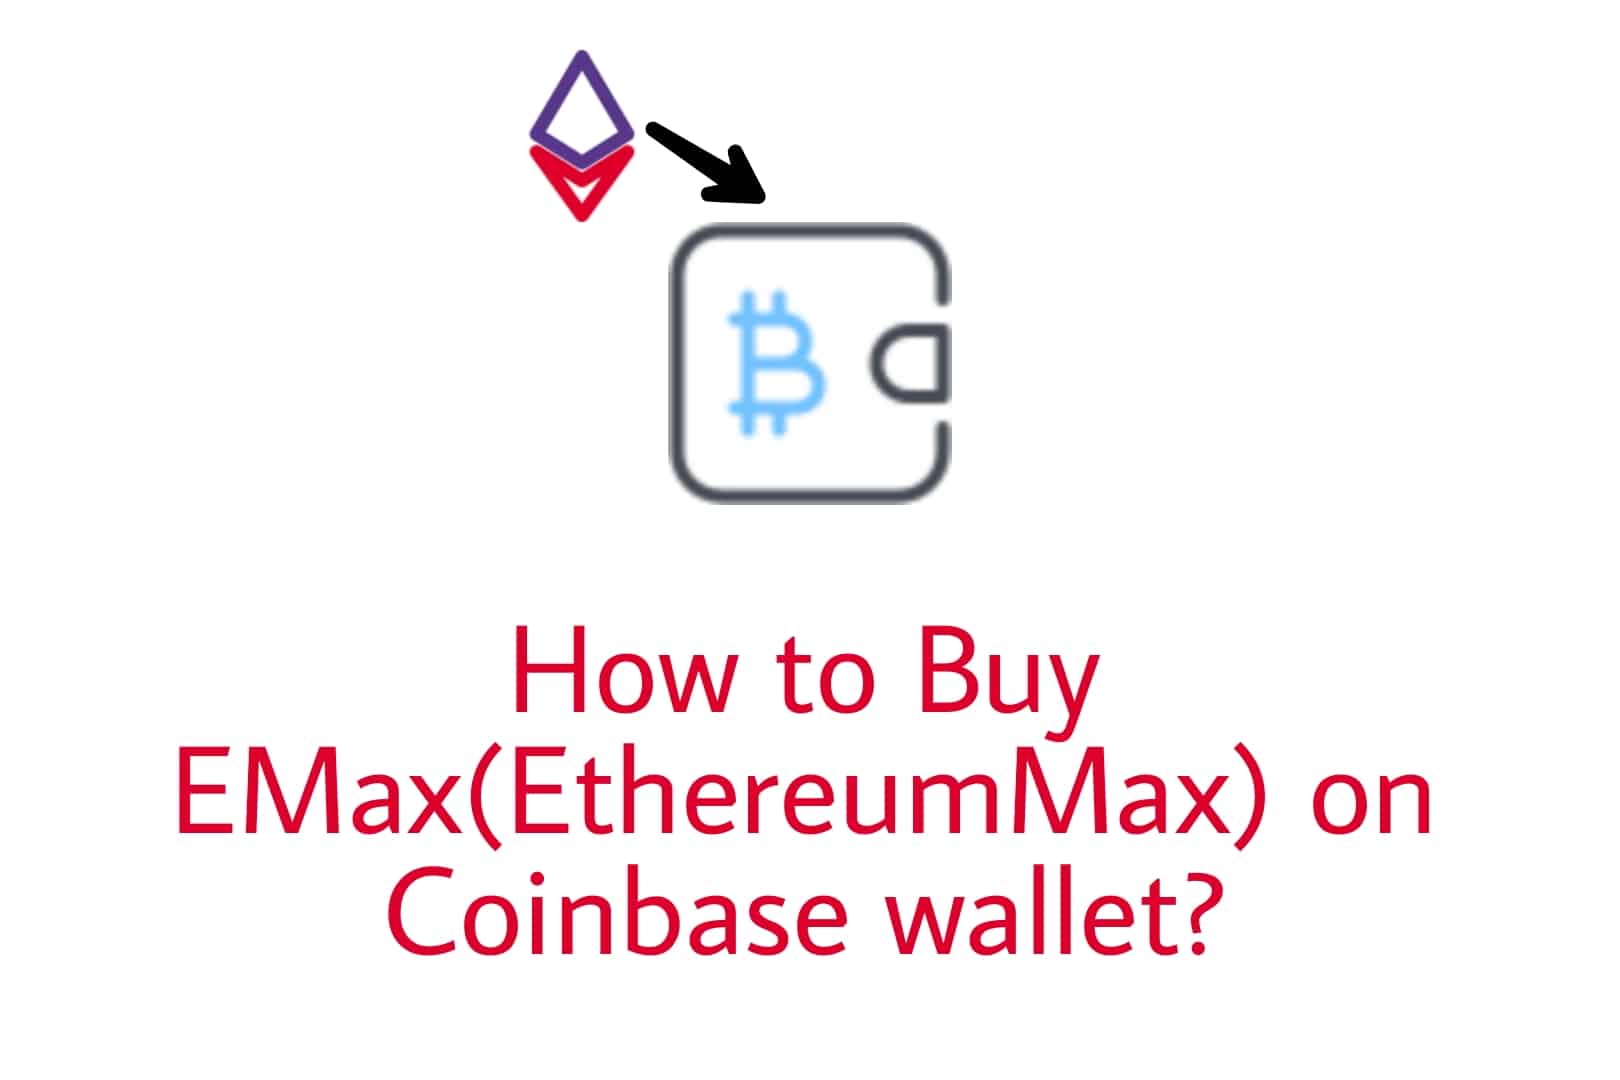 How to buy Emax on Coinbase wallet